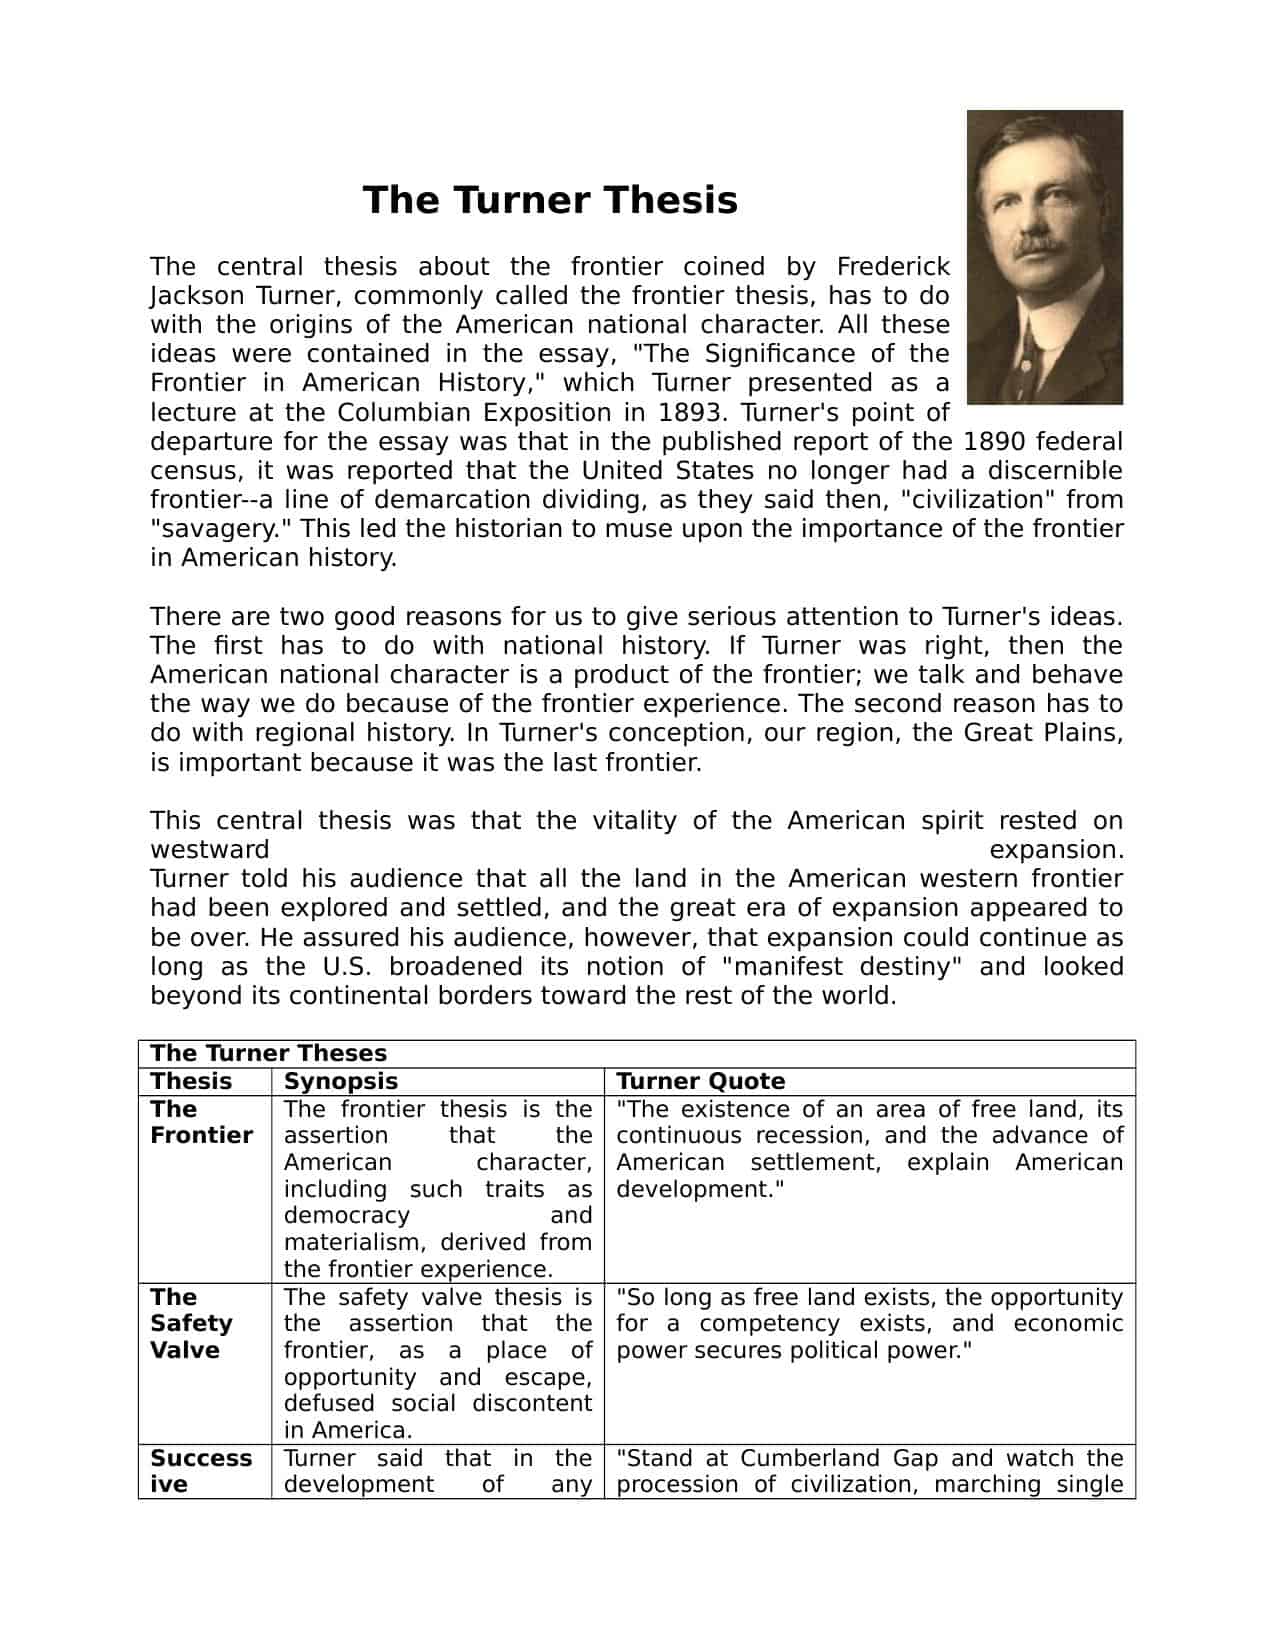 turner's thesis explained